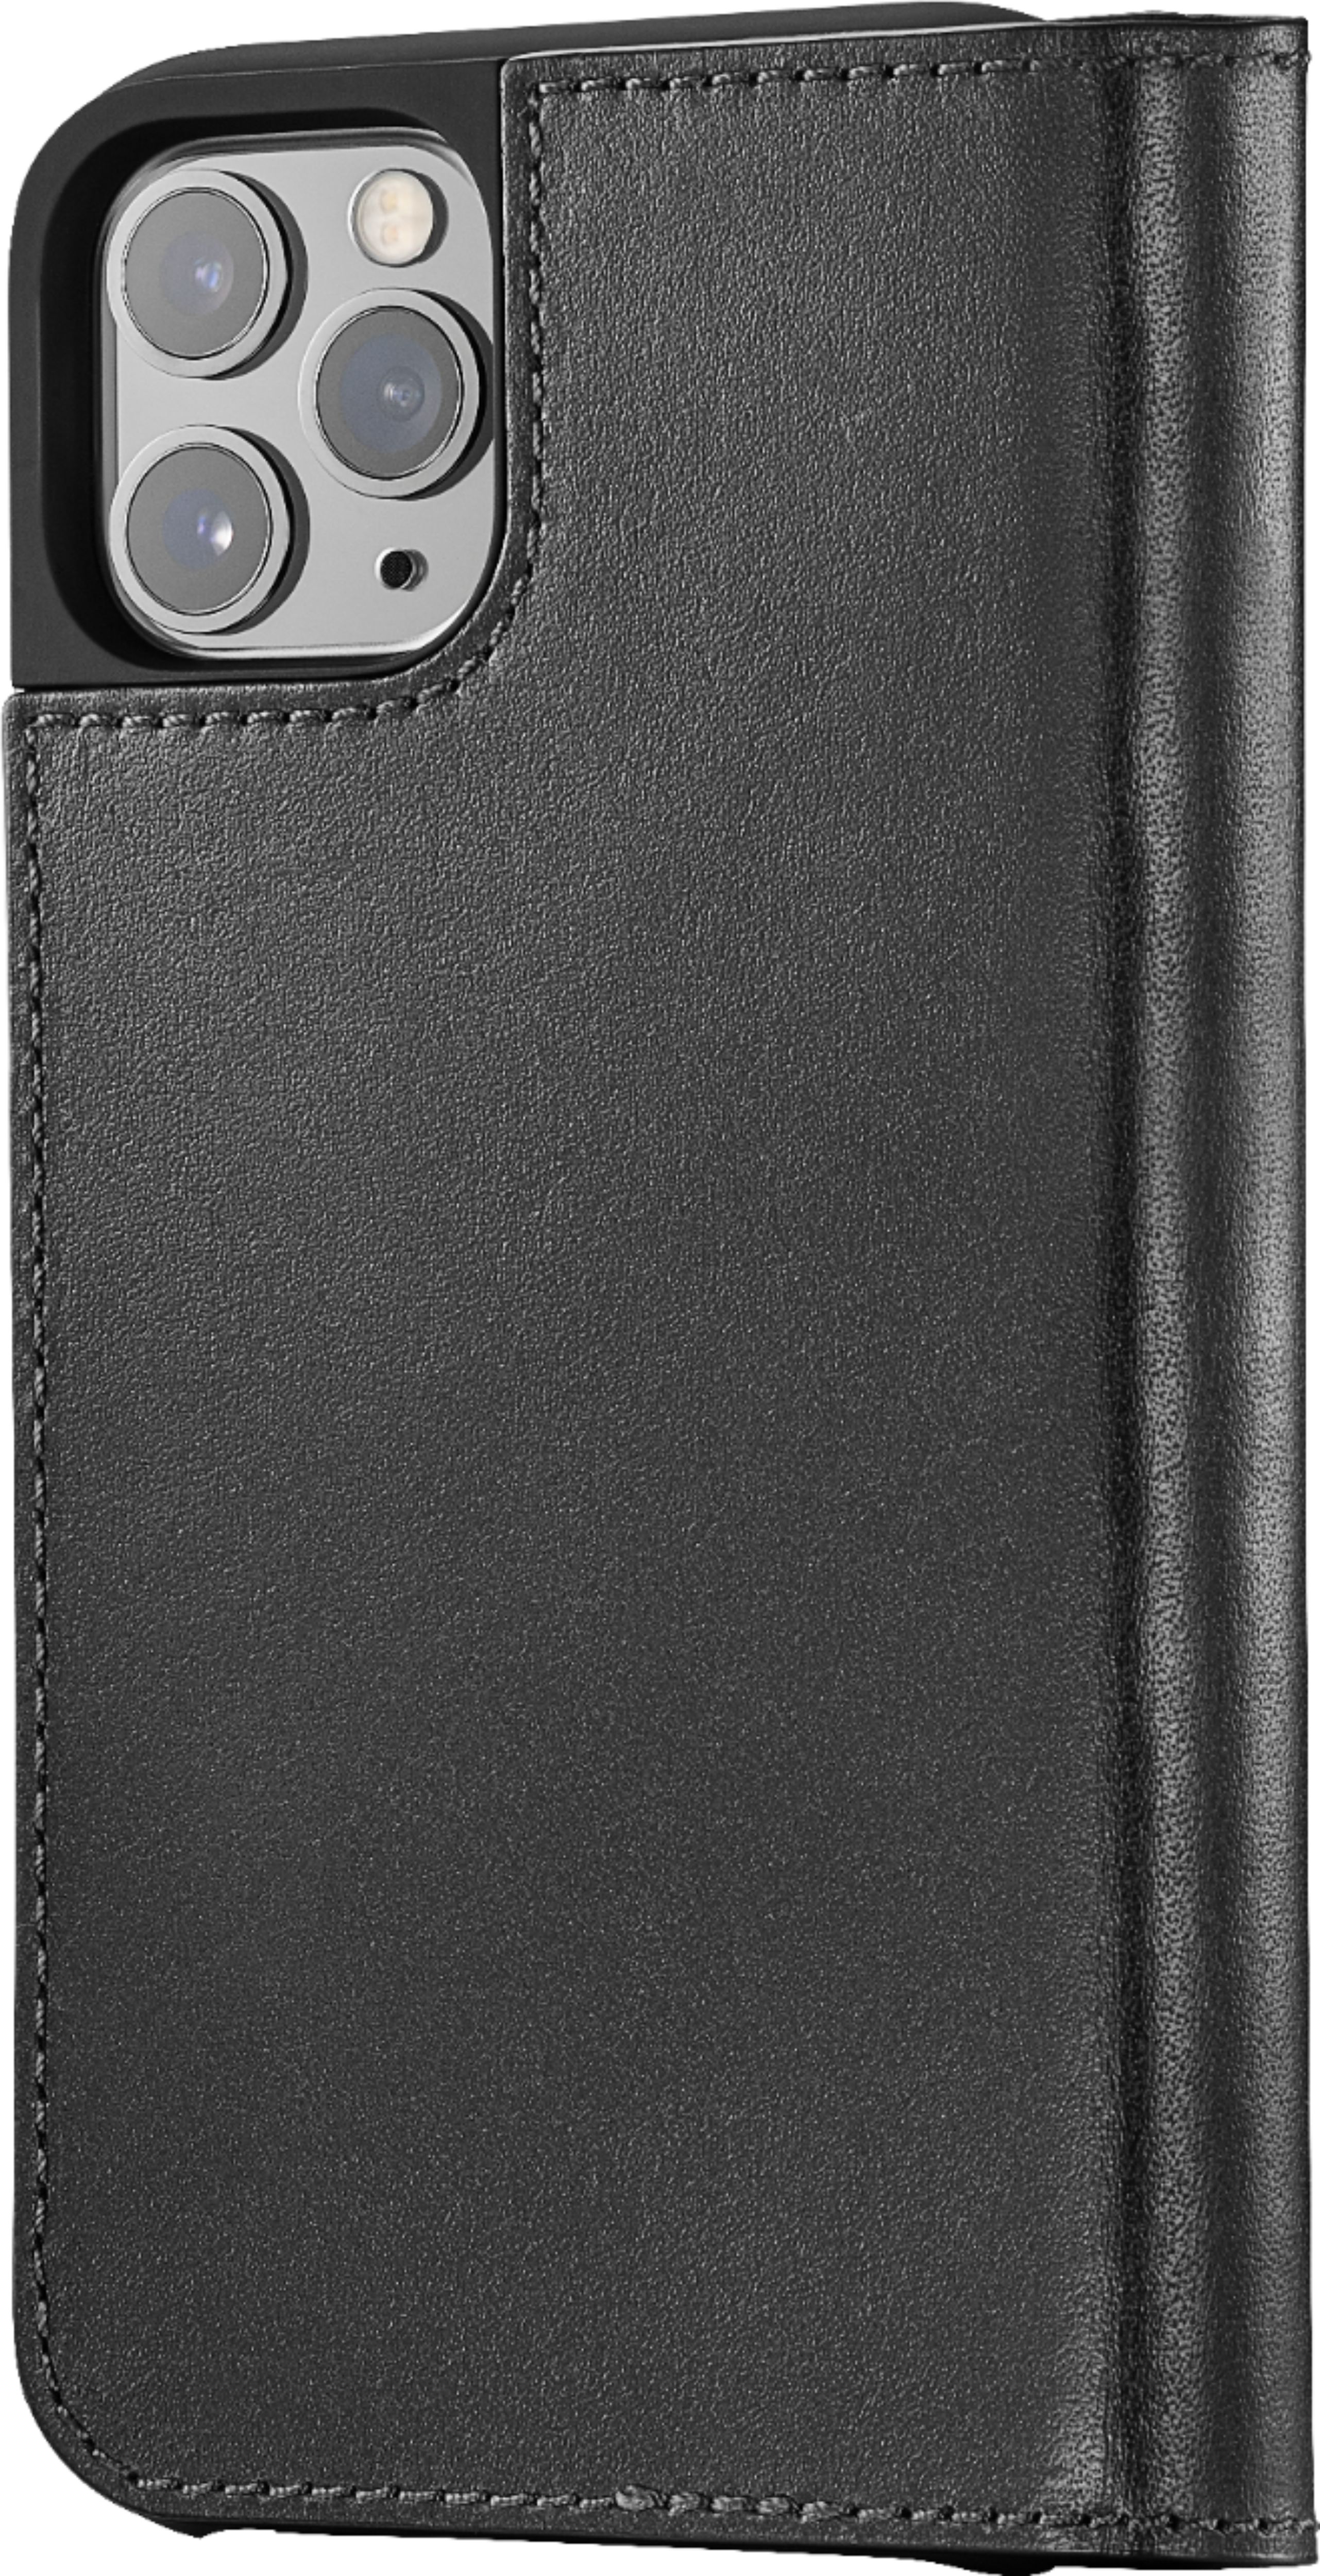 iPhone 11 Pro Max Case, Cellularvilla Diary Style Pu Leather